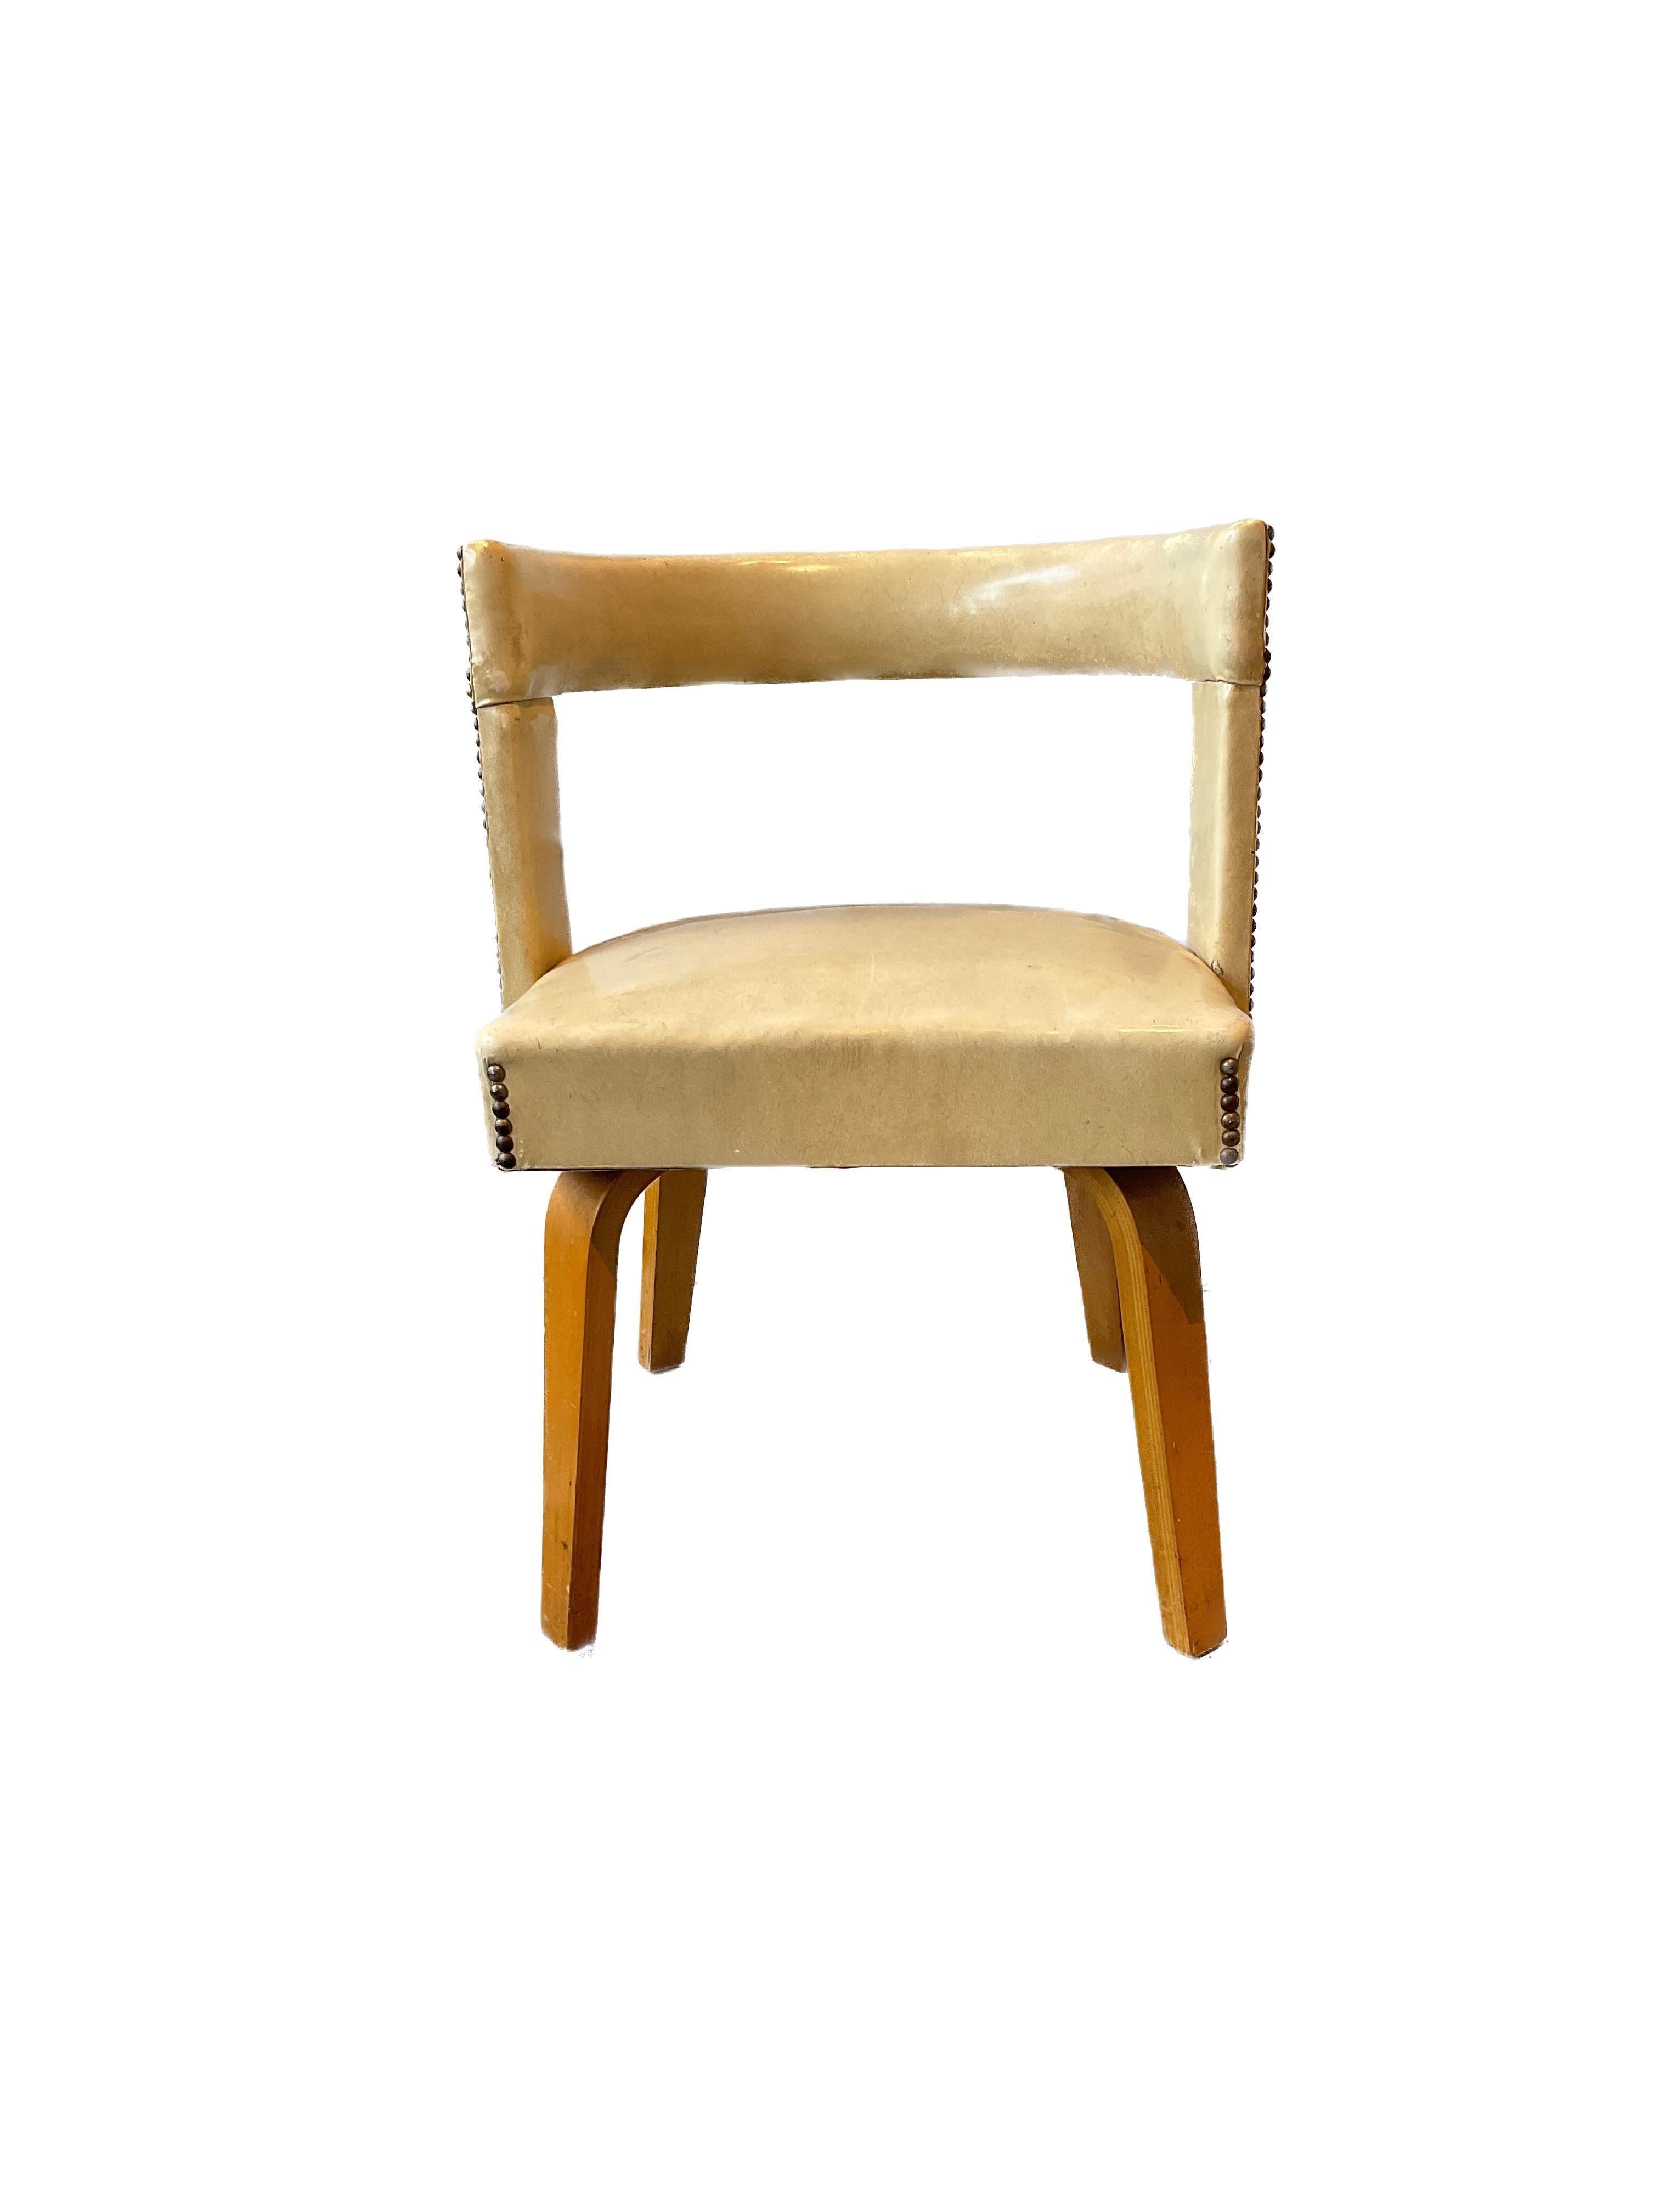 Mid-20th Century Pair of Architectural Thonet Chairs